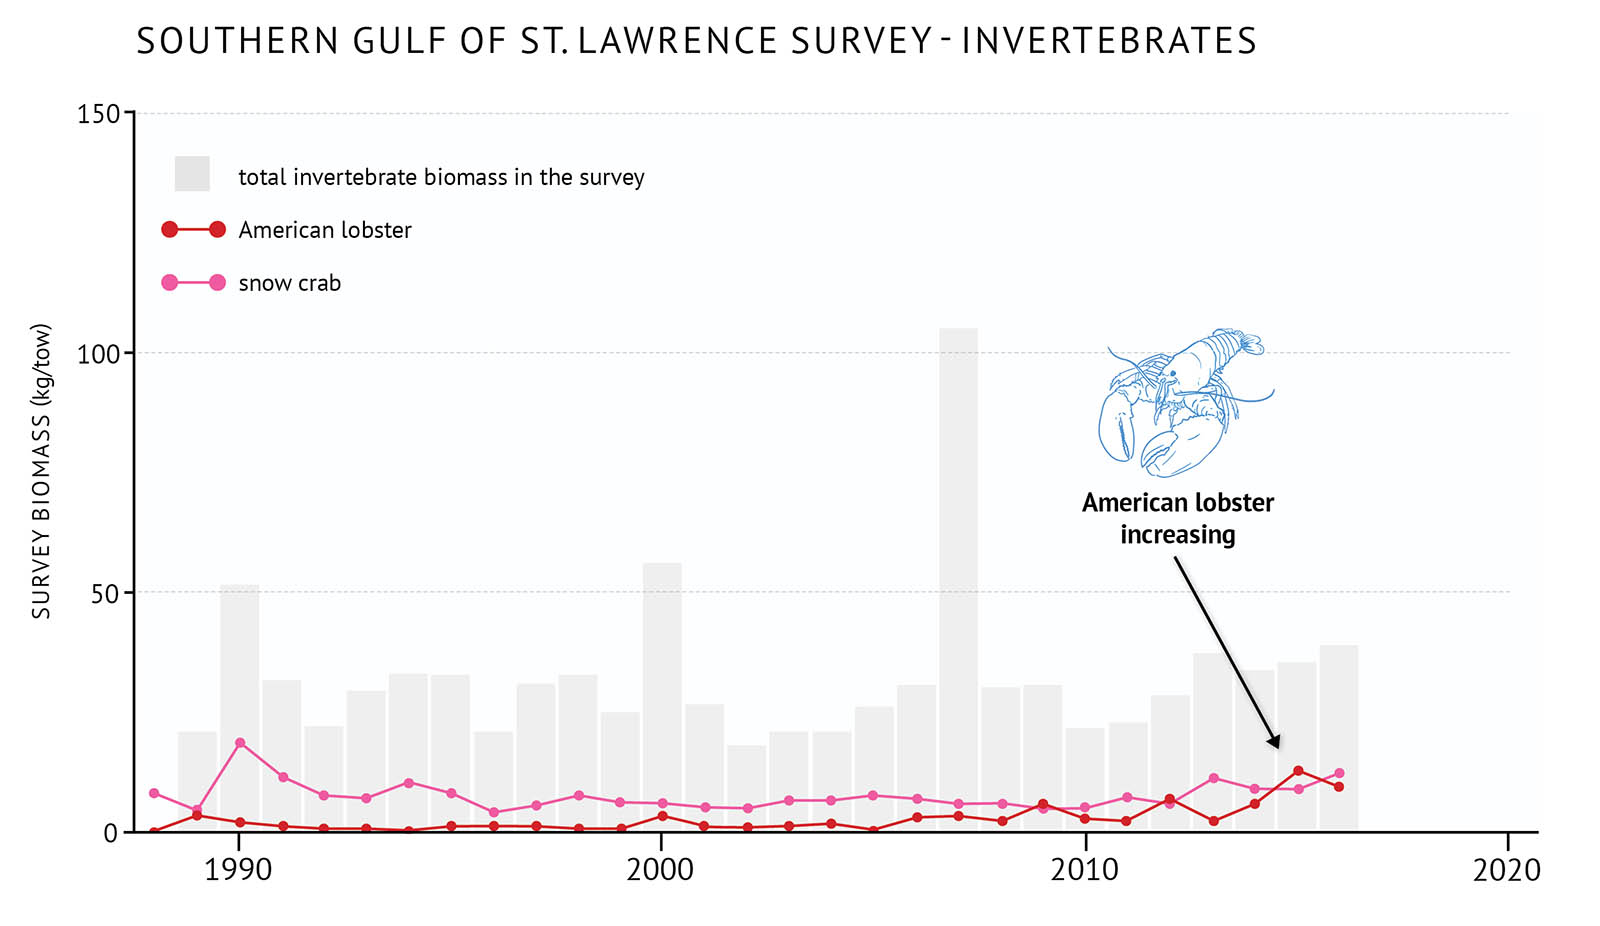 Figure 24: Survey biomass for benthic invertebrates, American lobster and snow crab in the southern Gulf of St. Lawrence. A bar and line graph illustrates the survey biomass for benthic invertebrates as well as individual species in the southern Gulf of St. Lawrence. Text above the graph says “Southern Gulf of St. Lawrence Survey - Invertebrates”. The vertical axis on the left shows the survey biomass in units of kilograms per tow from 0 to 150 in increments of 50. The bottom horizontal axis shows the years between 1990 and 2020 in 10 year increments. The biomass for total pelagic fish in the survey is represented by grey vertical bars. The data extends from 1988 to 2016. The total survey biomass fluctuates around 25 kilograms per tow with peaks of near 50 kilograms per tow in 1990 and 2000. Another peak just above 100 kilograms per tow occurs in 2007. The survey biomass of individual species is represented by coloured lines on the same graph. A legend appears on the left. A red data line shows the survey biomass for American lobster. A light red data line shows the survey biomass for snow crab. Both snow crab and American lobster biomasses are fairly flat across the time period of the graph and fluctuate generally below 10 kilograms per tow. Snow crab biomass is higher than American lobster until the late 2000s when American lobster biomass increases. A small, light blue outline drawing of an American lobster is placed above the vertical bars to the right-hand side of the graph. Below the drawing there is text which states “American lobster increasing”. An arrow points from the text to the mid-2010s period.